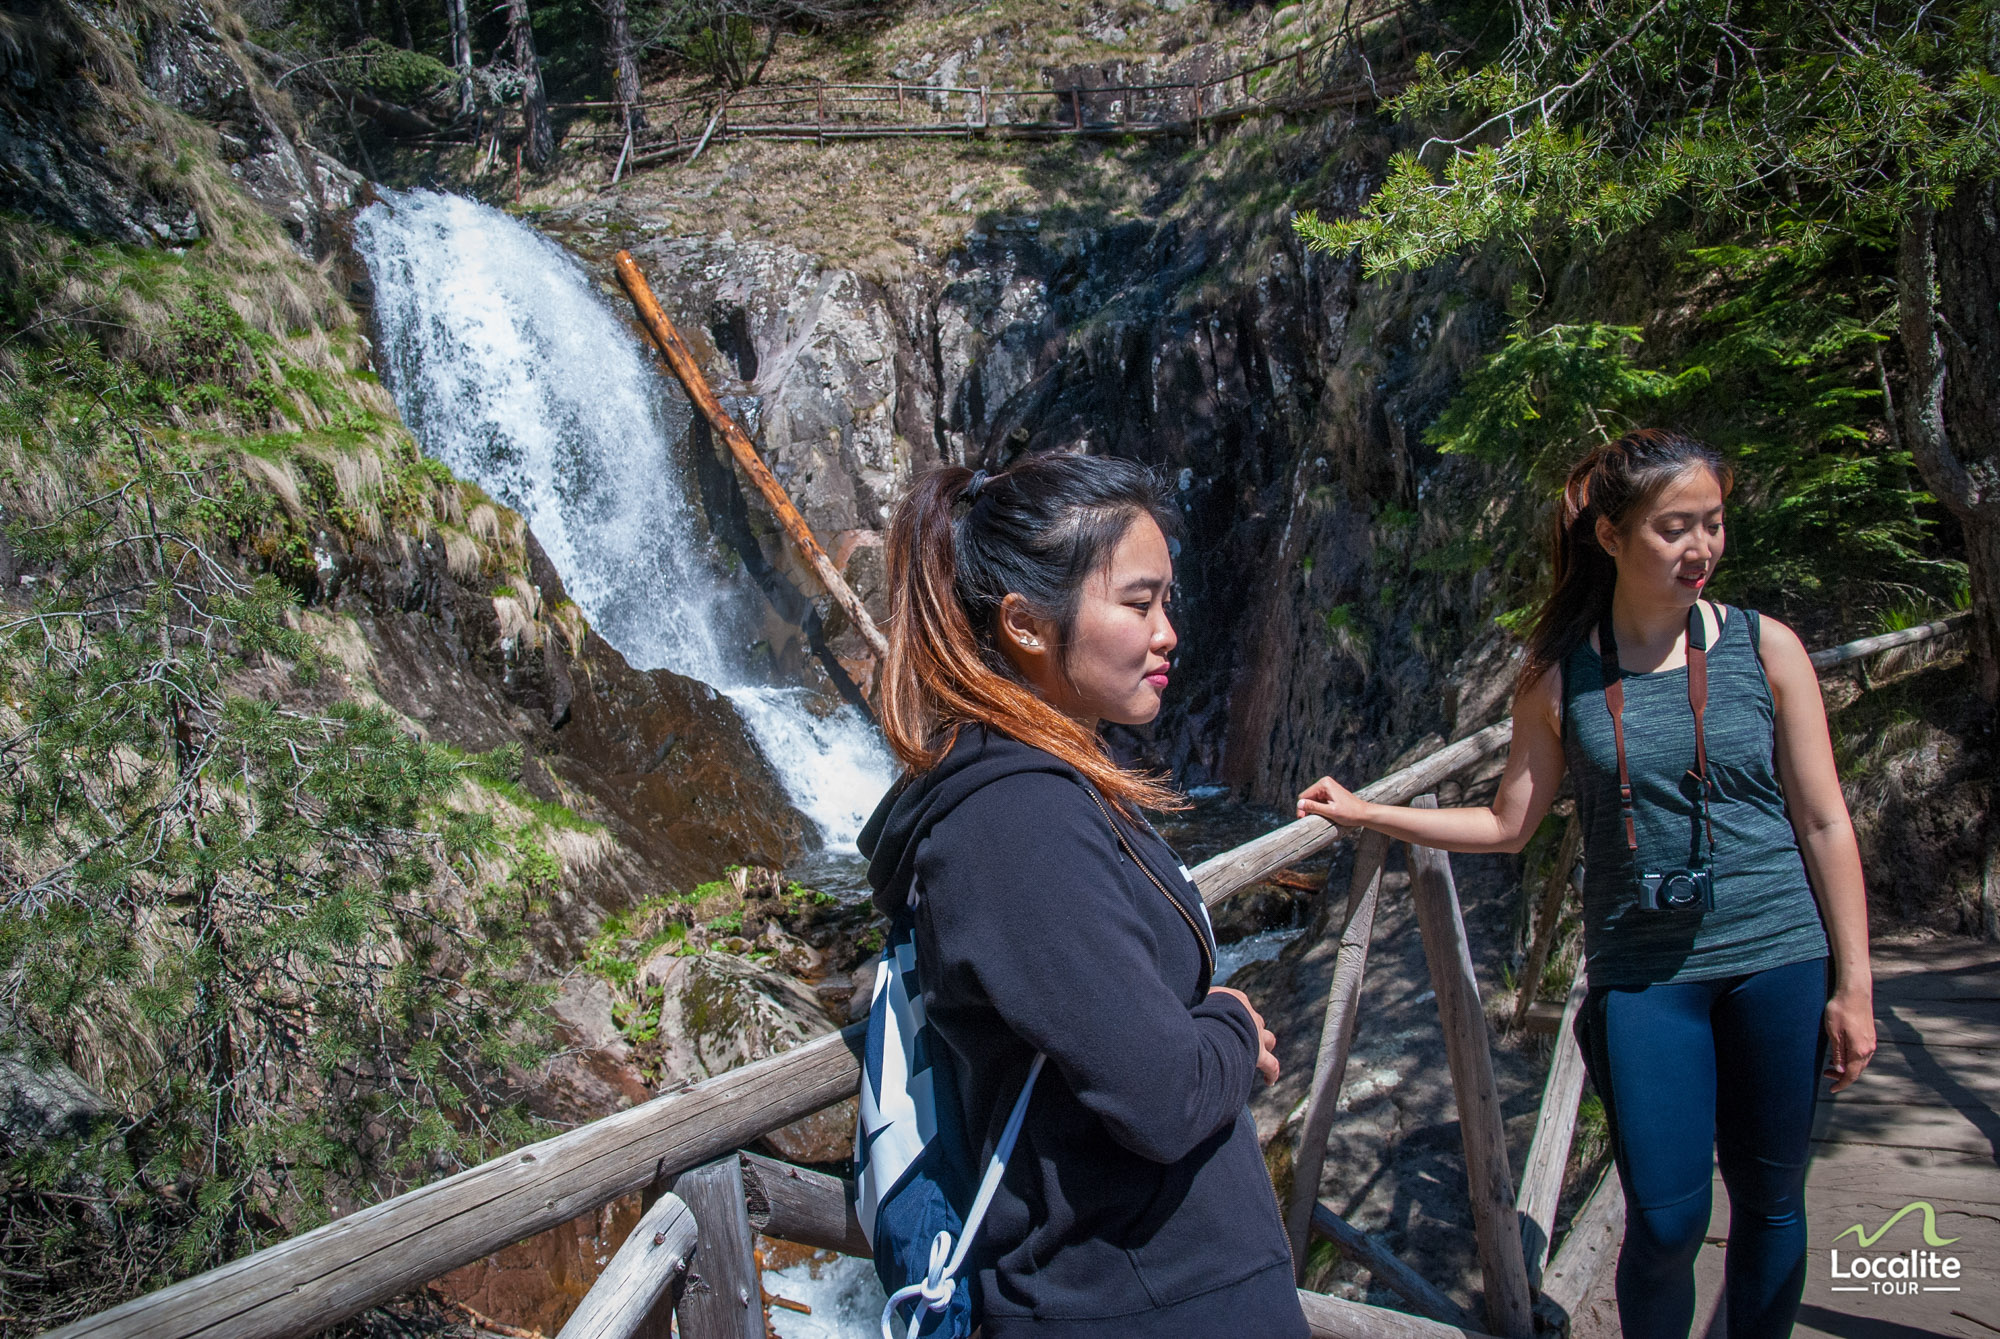 Two girls on a wooden bridge at one of the waterfalls on the Waterfalls canyon hike